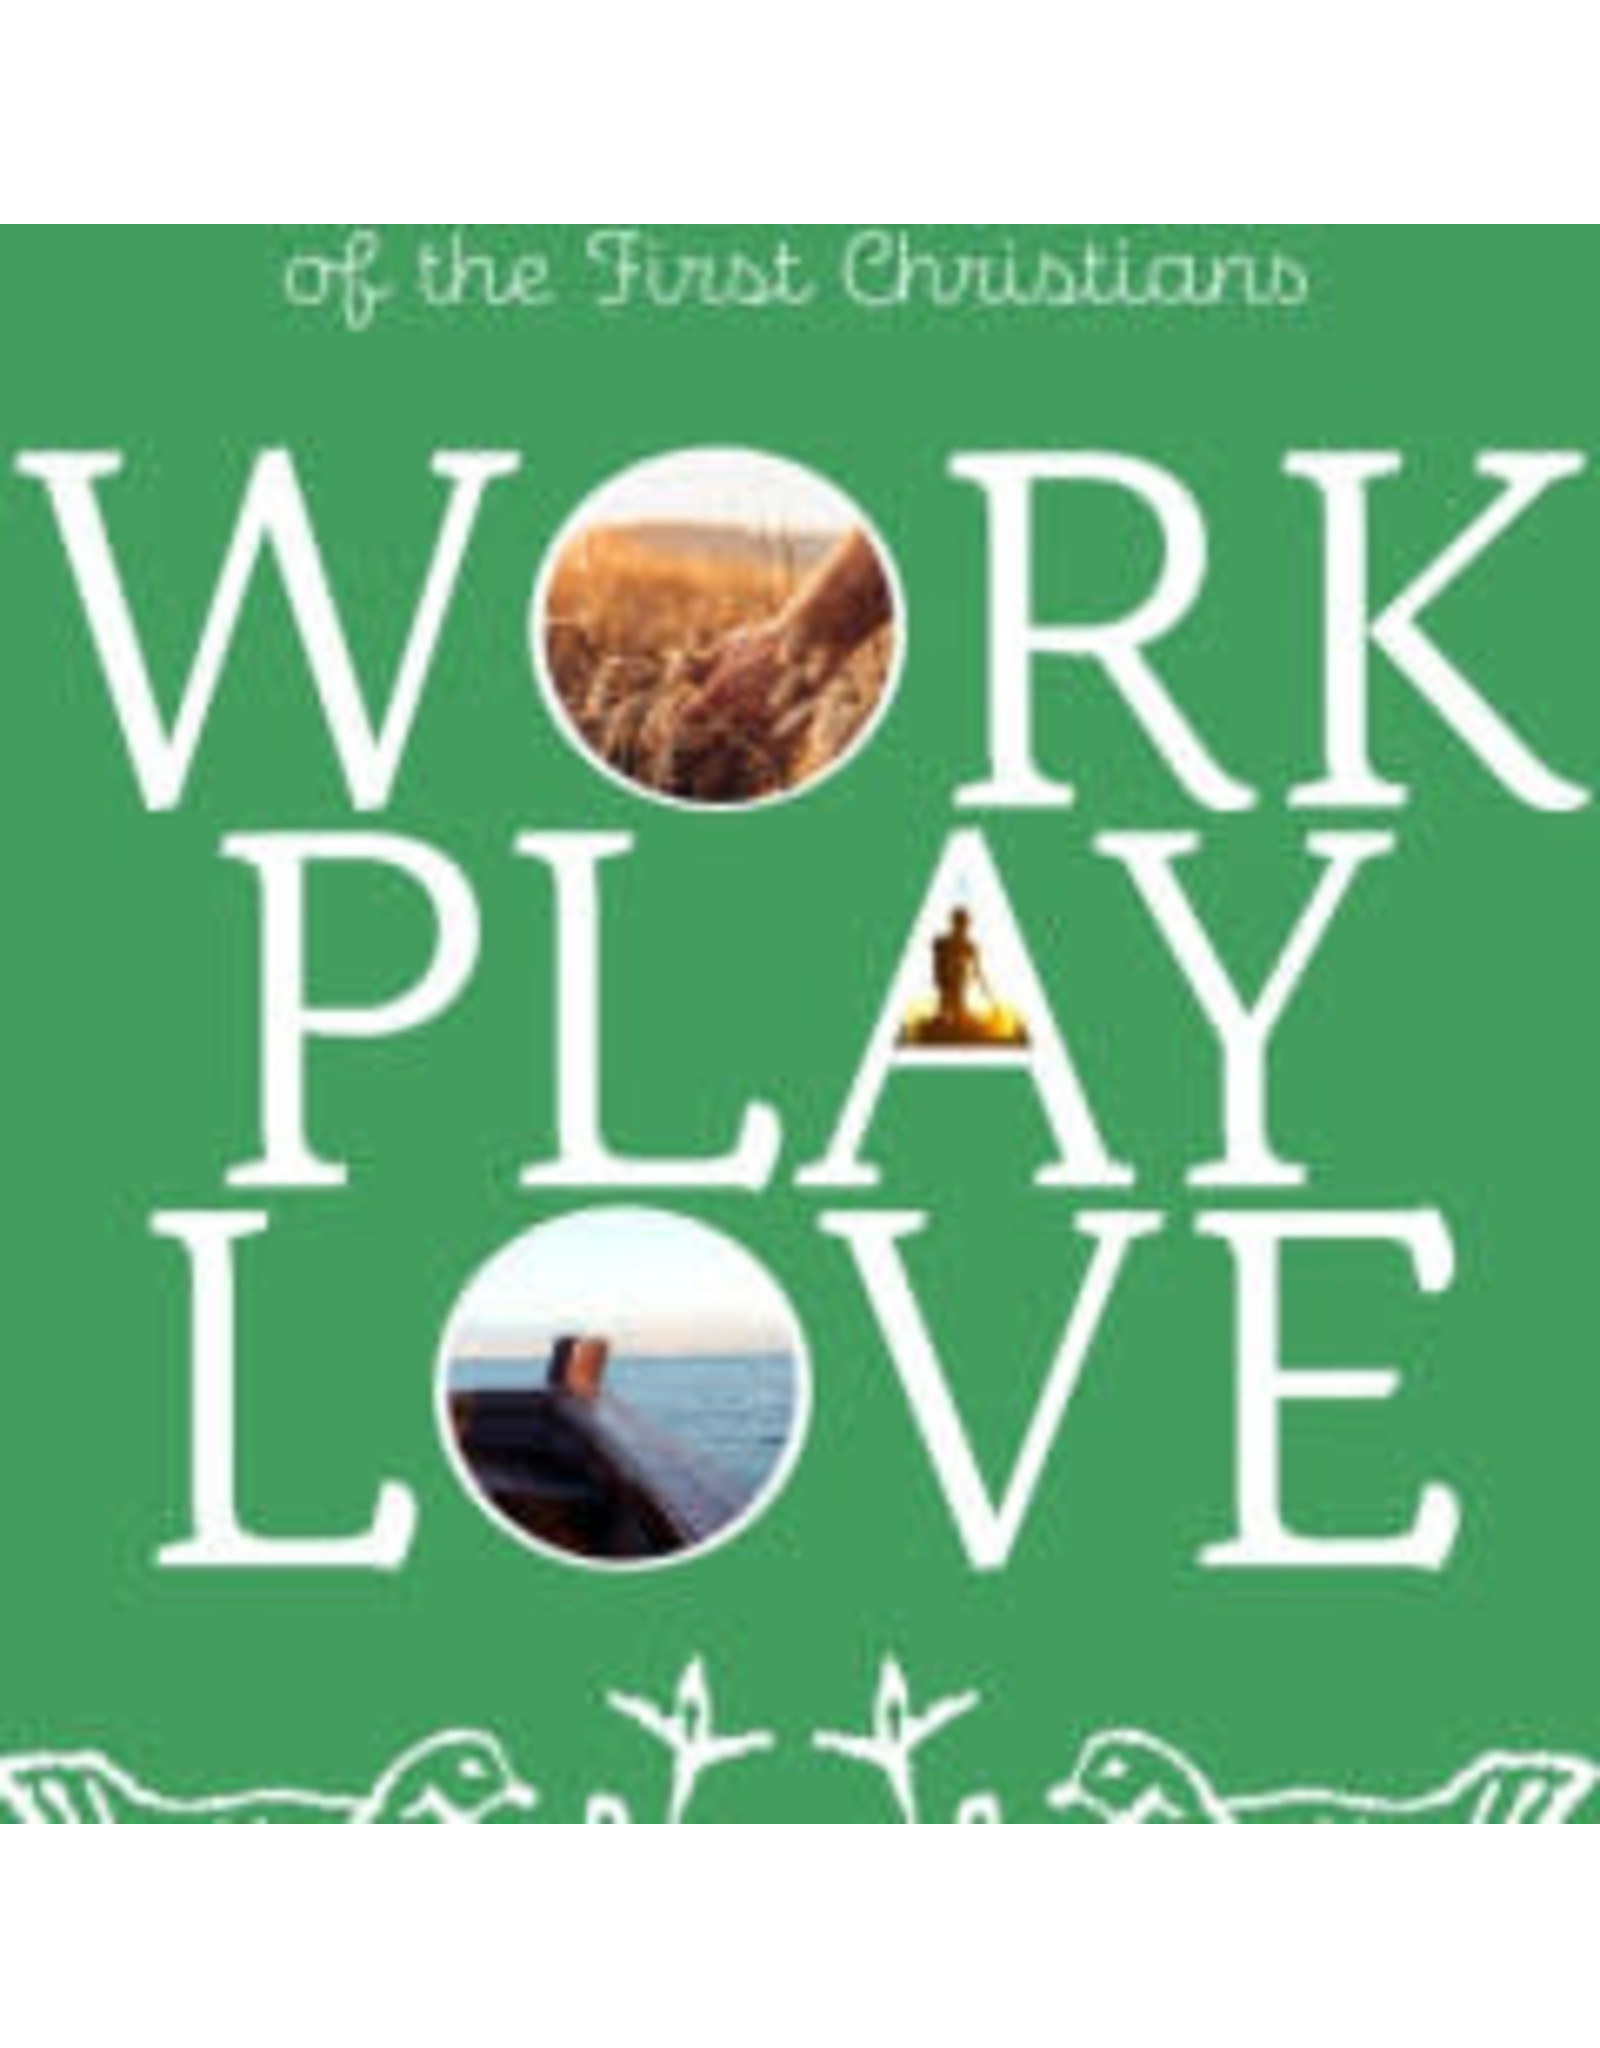 Paraclete Press Work Play Love: How the Mass Changed the Life of the First Christians by Mike Aquilina (Paperback)